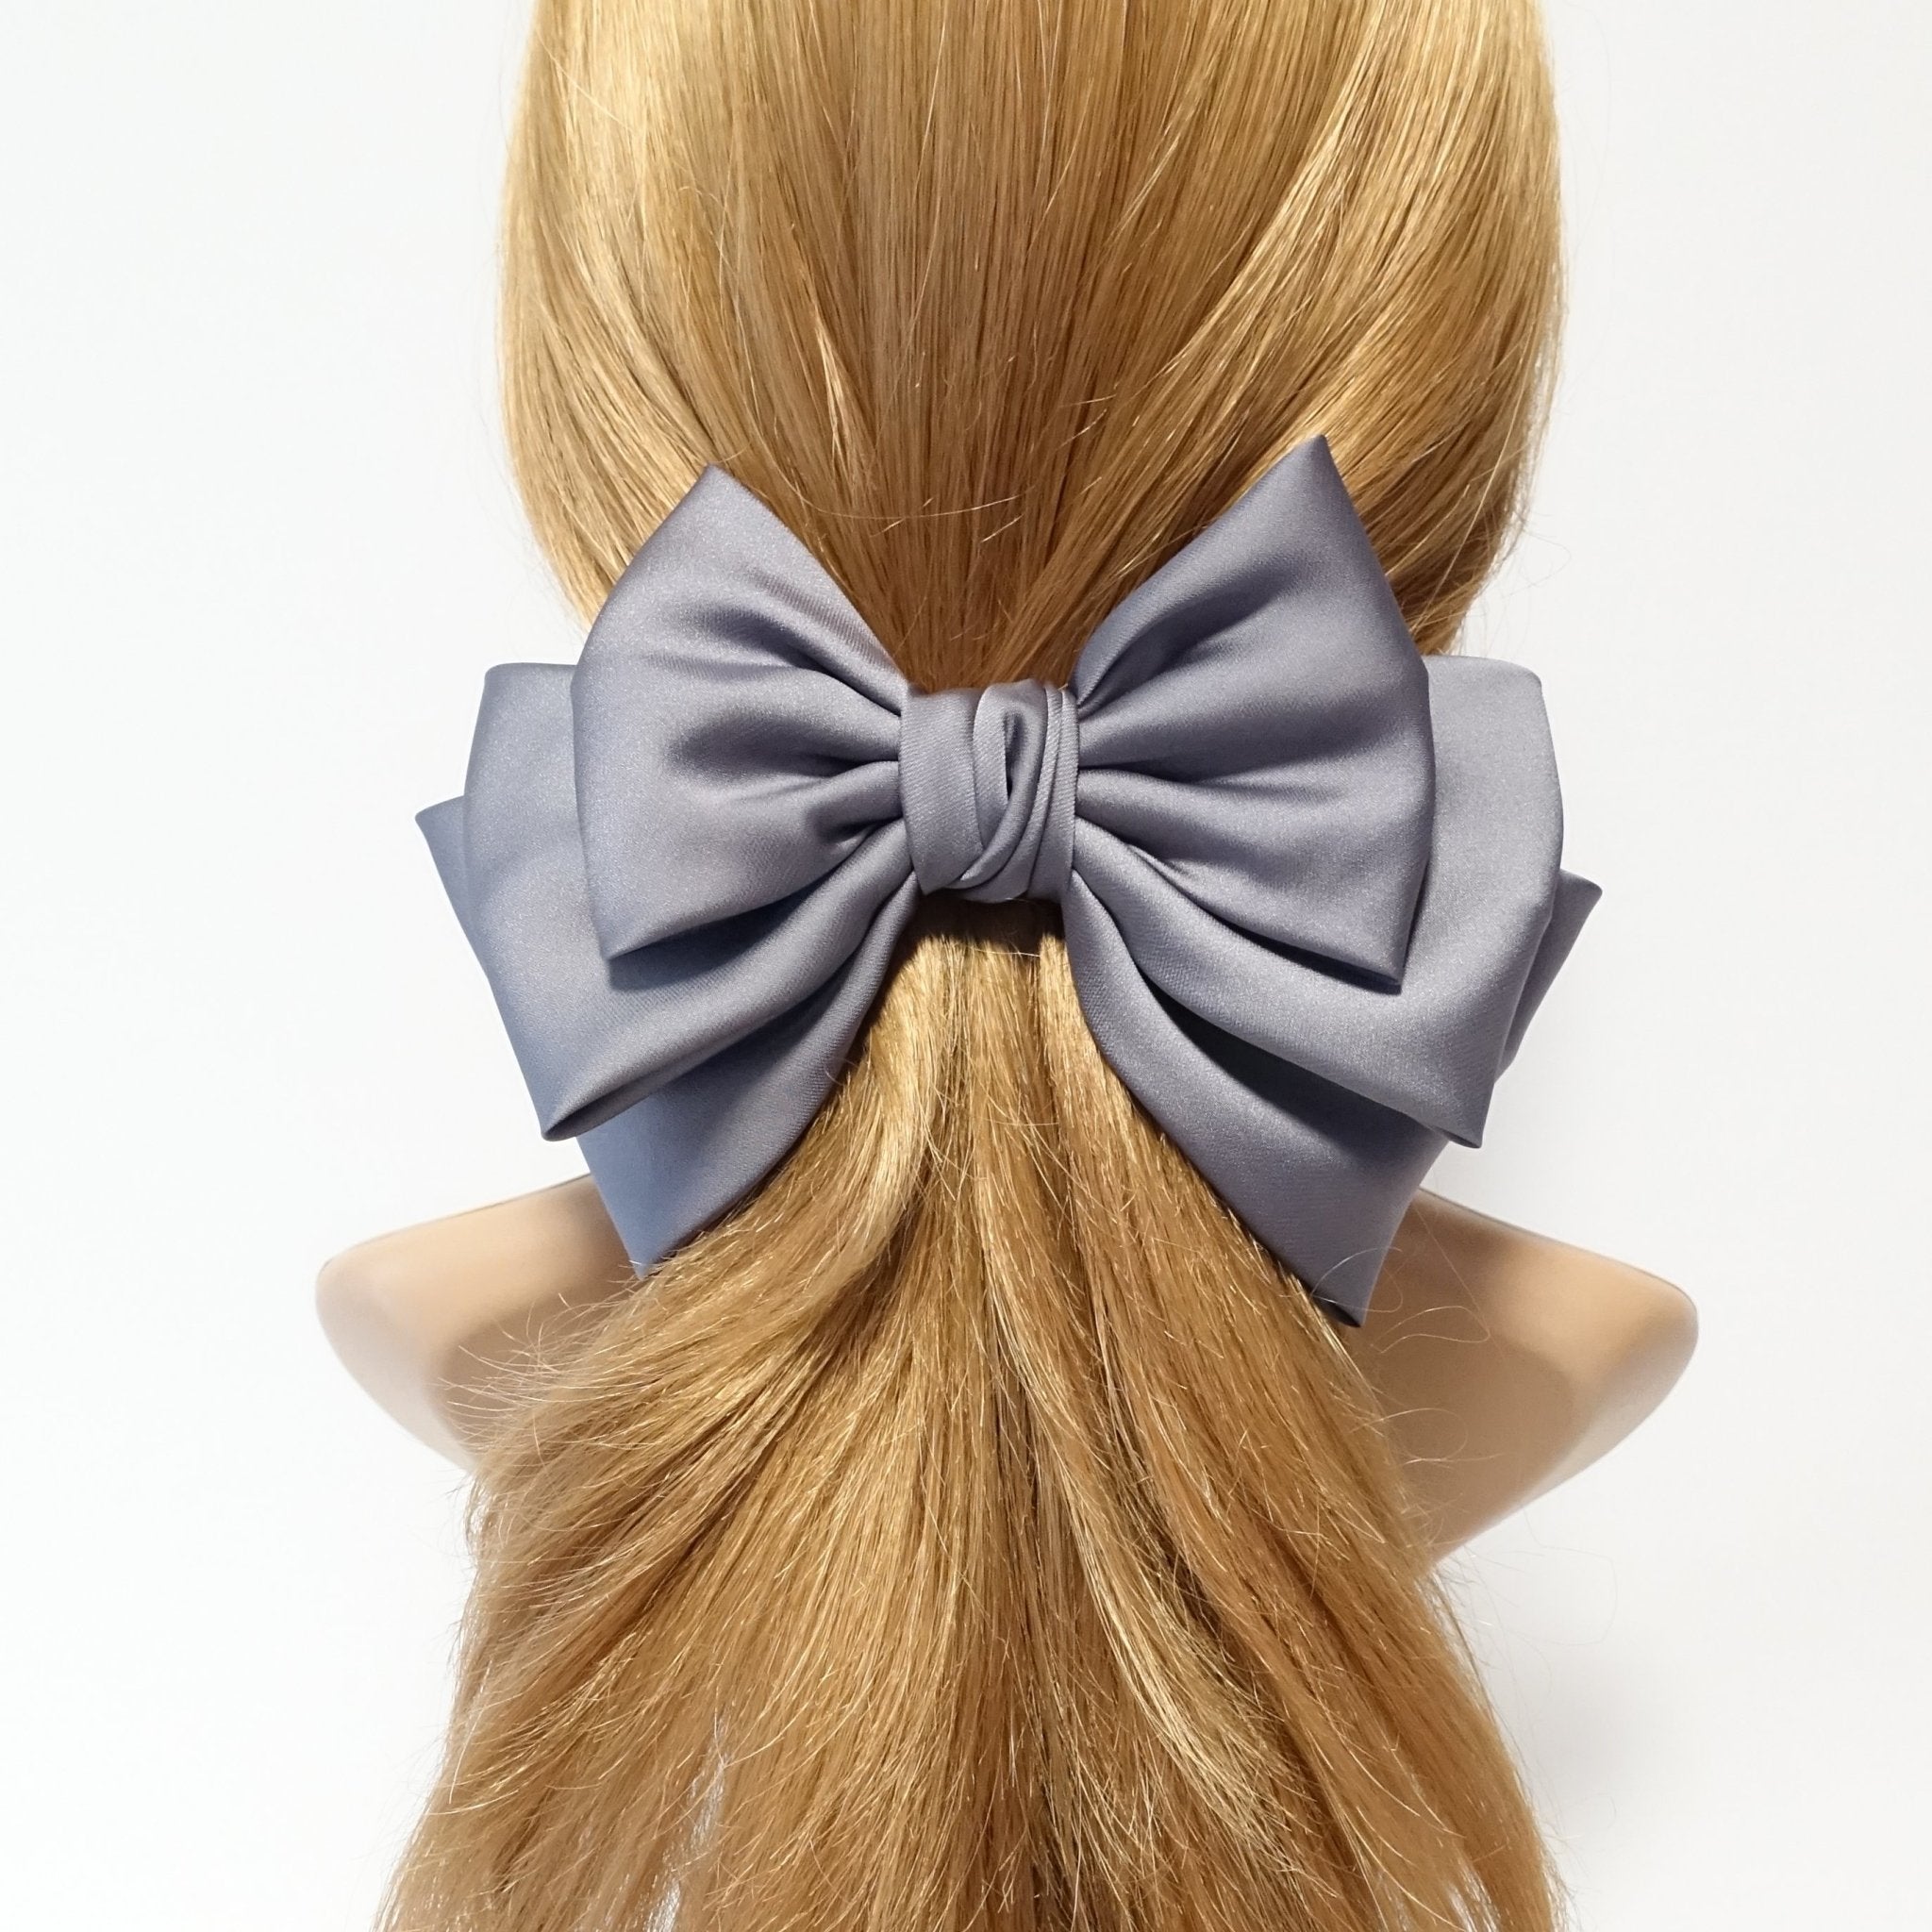 veryshine.com claw/banana/barrette Gray satin layered hair bow french barrette Women solid color stylish hair bow